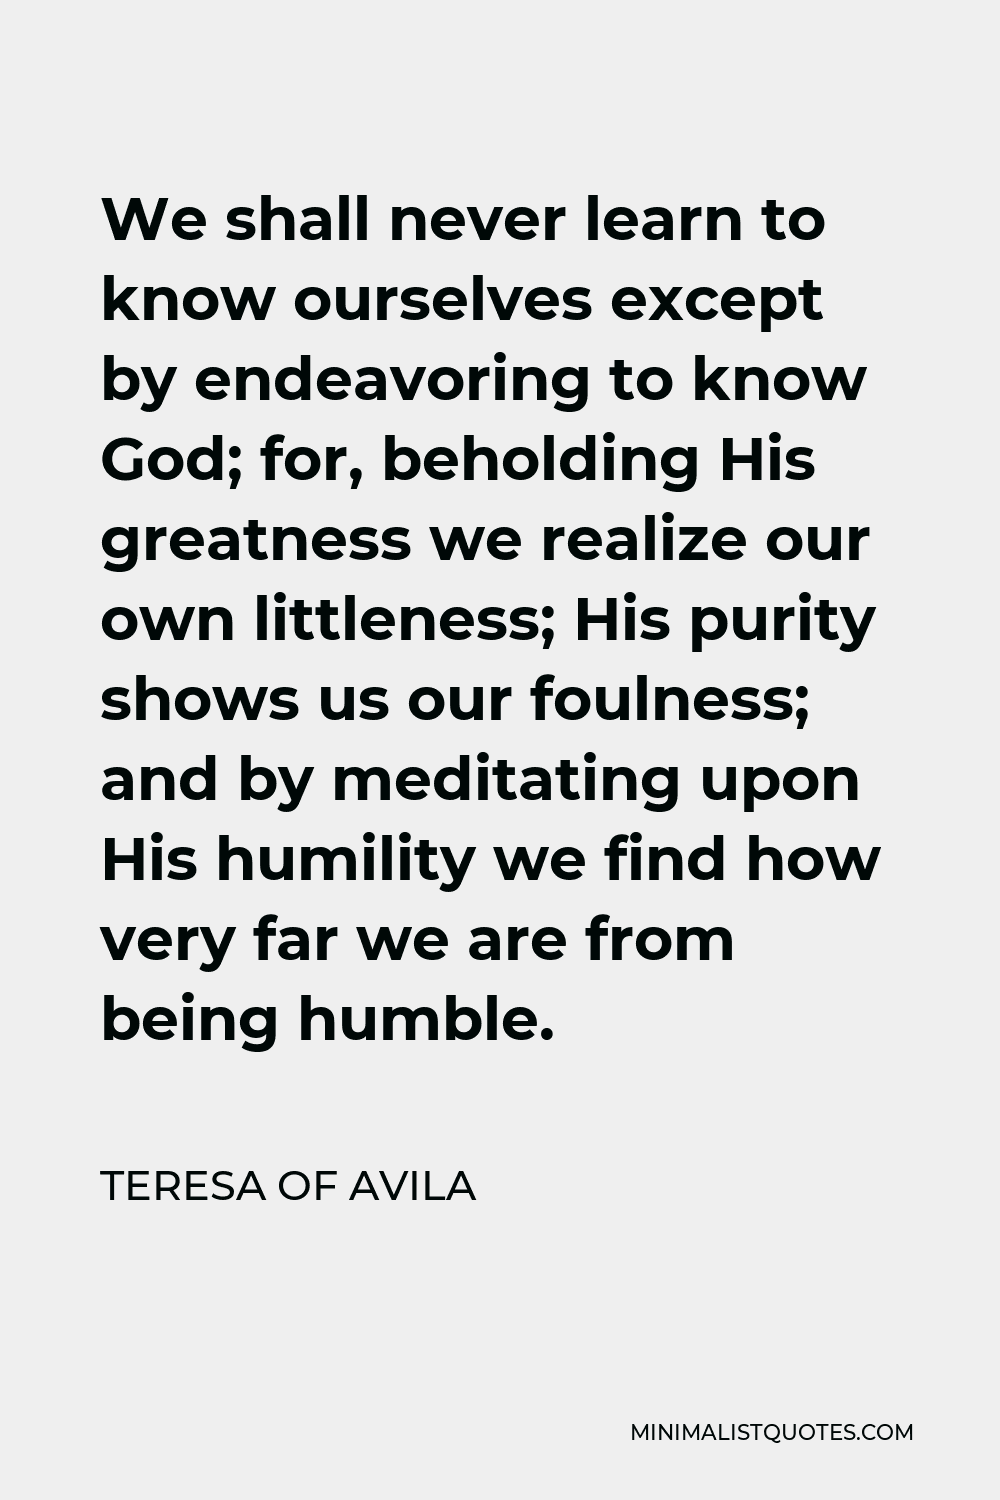 Teresa of Avila Quote - We shall never learn to know ourselves except by endeavoring to know God; for, beholding His greatness we realize our own littleness; His purity shows us our foulness; and by meditating upon His humility we find how very far we are from being humble.